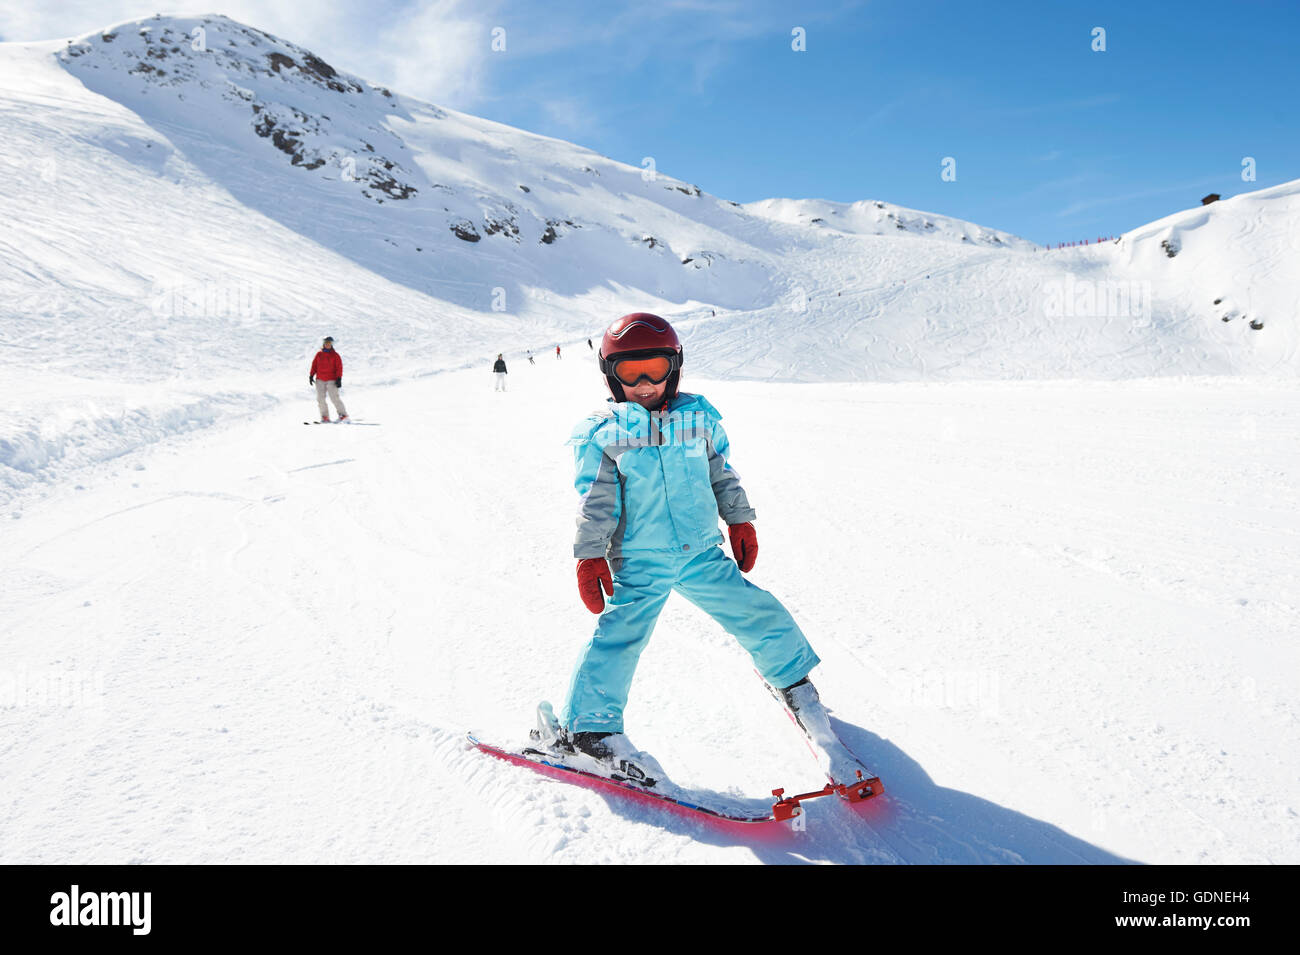 Portrait of young boy on skis Stock Photo